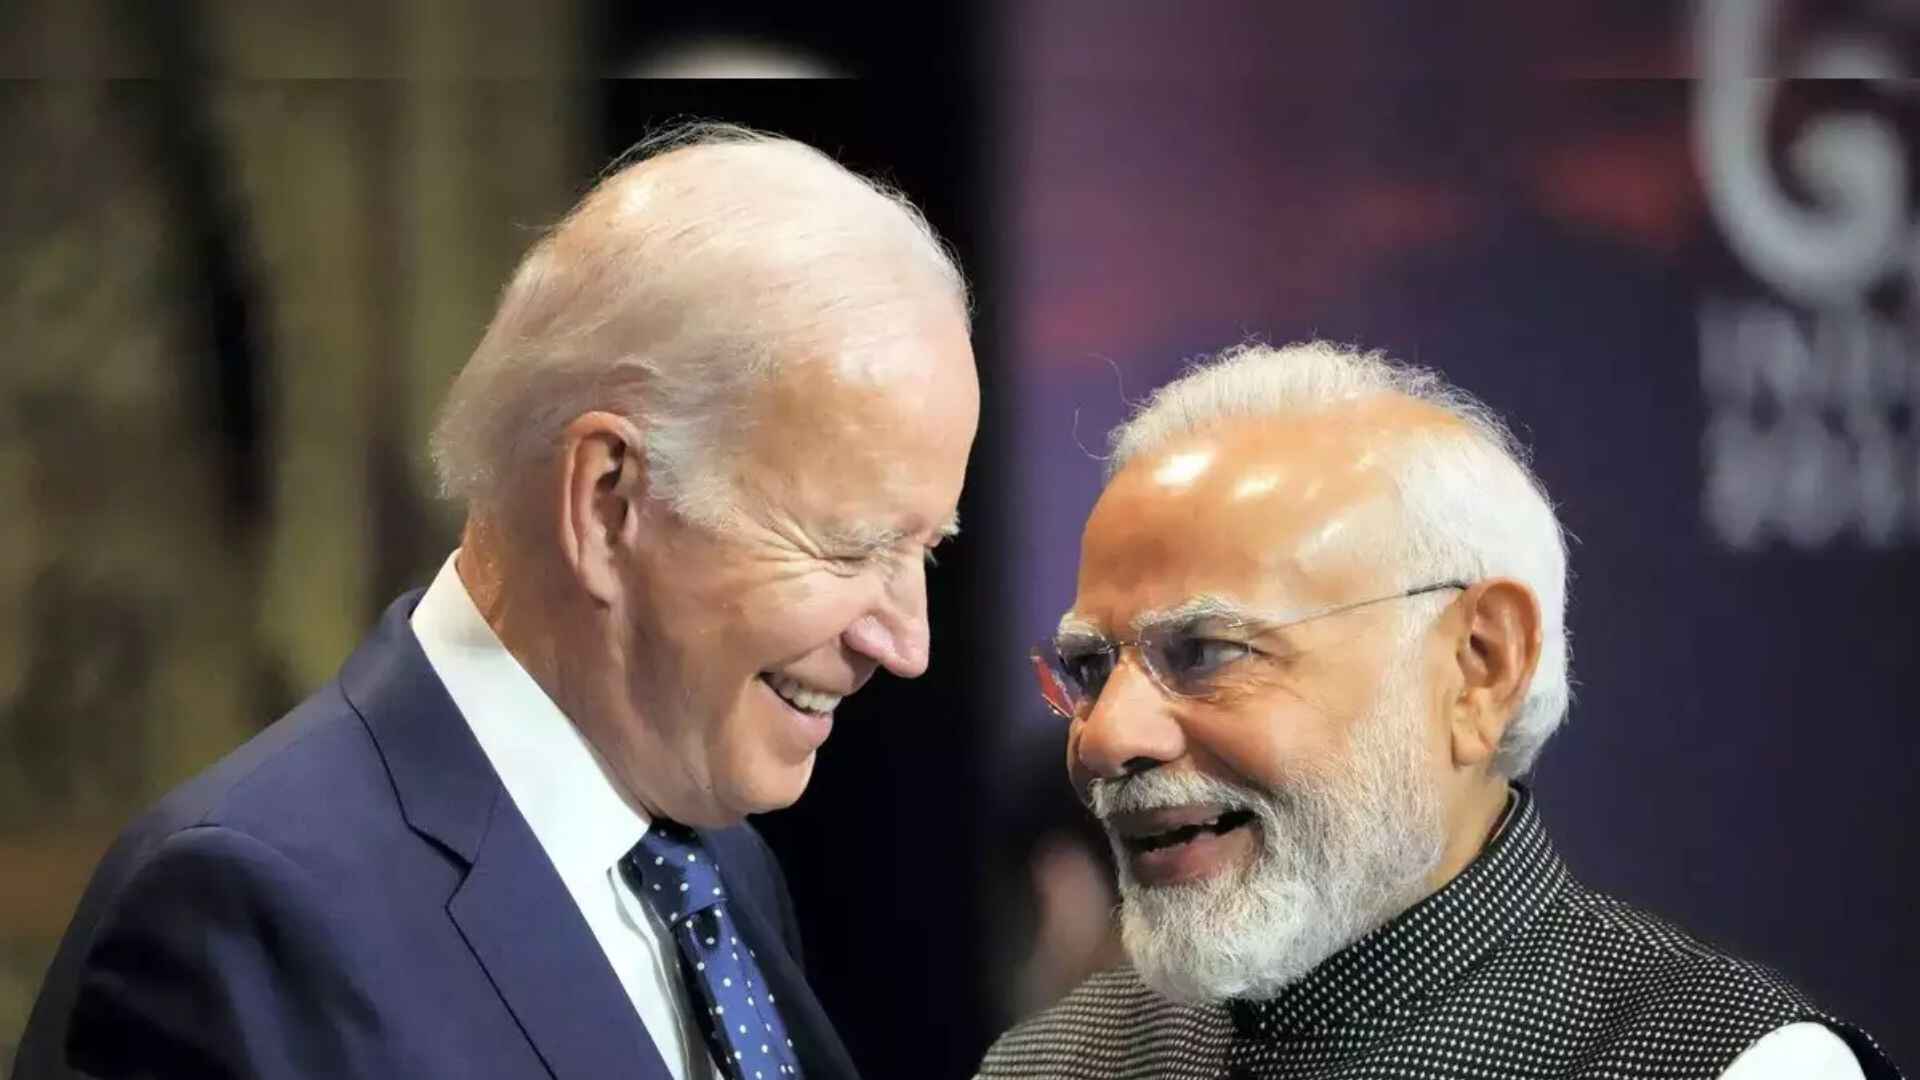 PM Modi Attends G7 Summit, May Hold Meetings With Biden